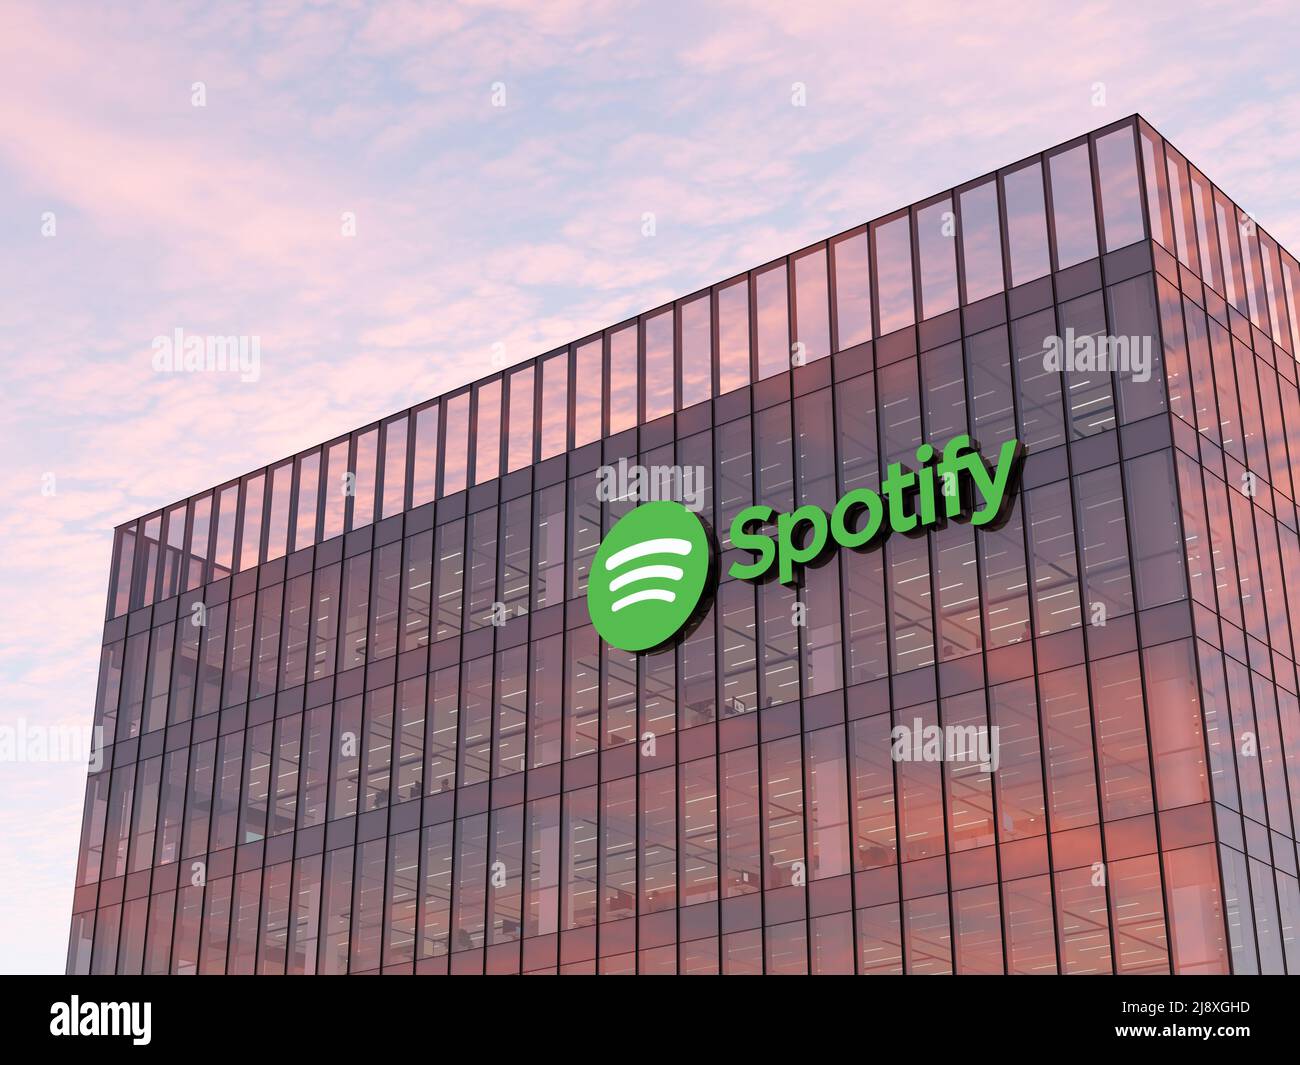 https://c8.alamy.com/comp/2J8XGHD/stockholm-sweden-may-2-2022-editorial-use-only-3d-cgi-spotify-signage-logo-on-top-of-glass-building-workplace-multinational-streaming-and-media-2J8XGHD.jpg